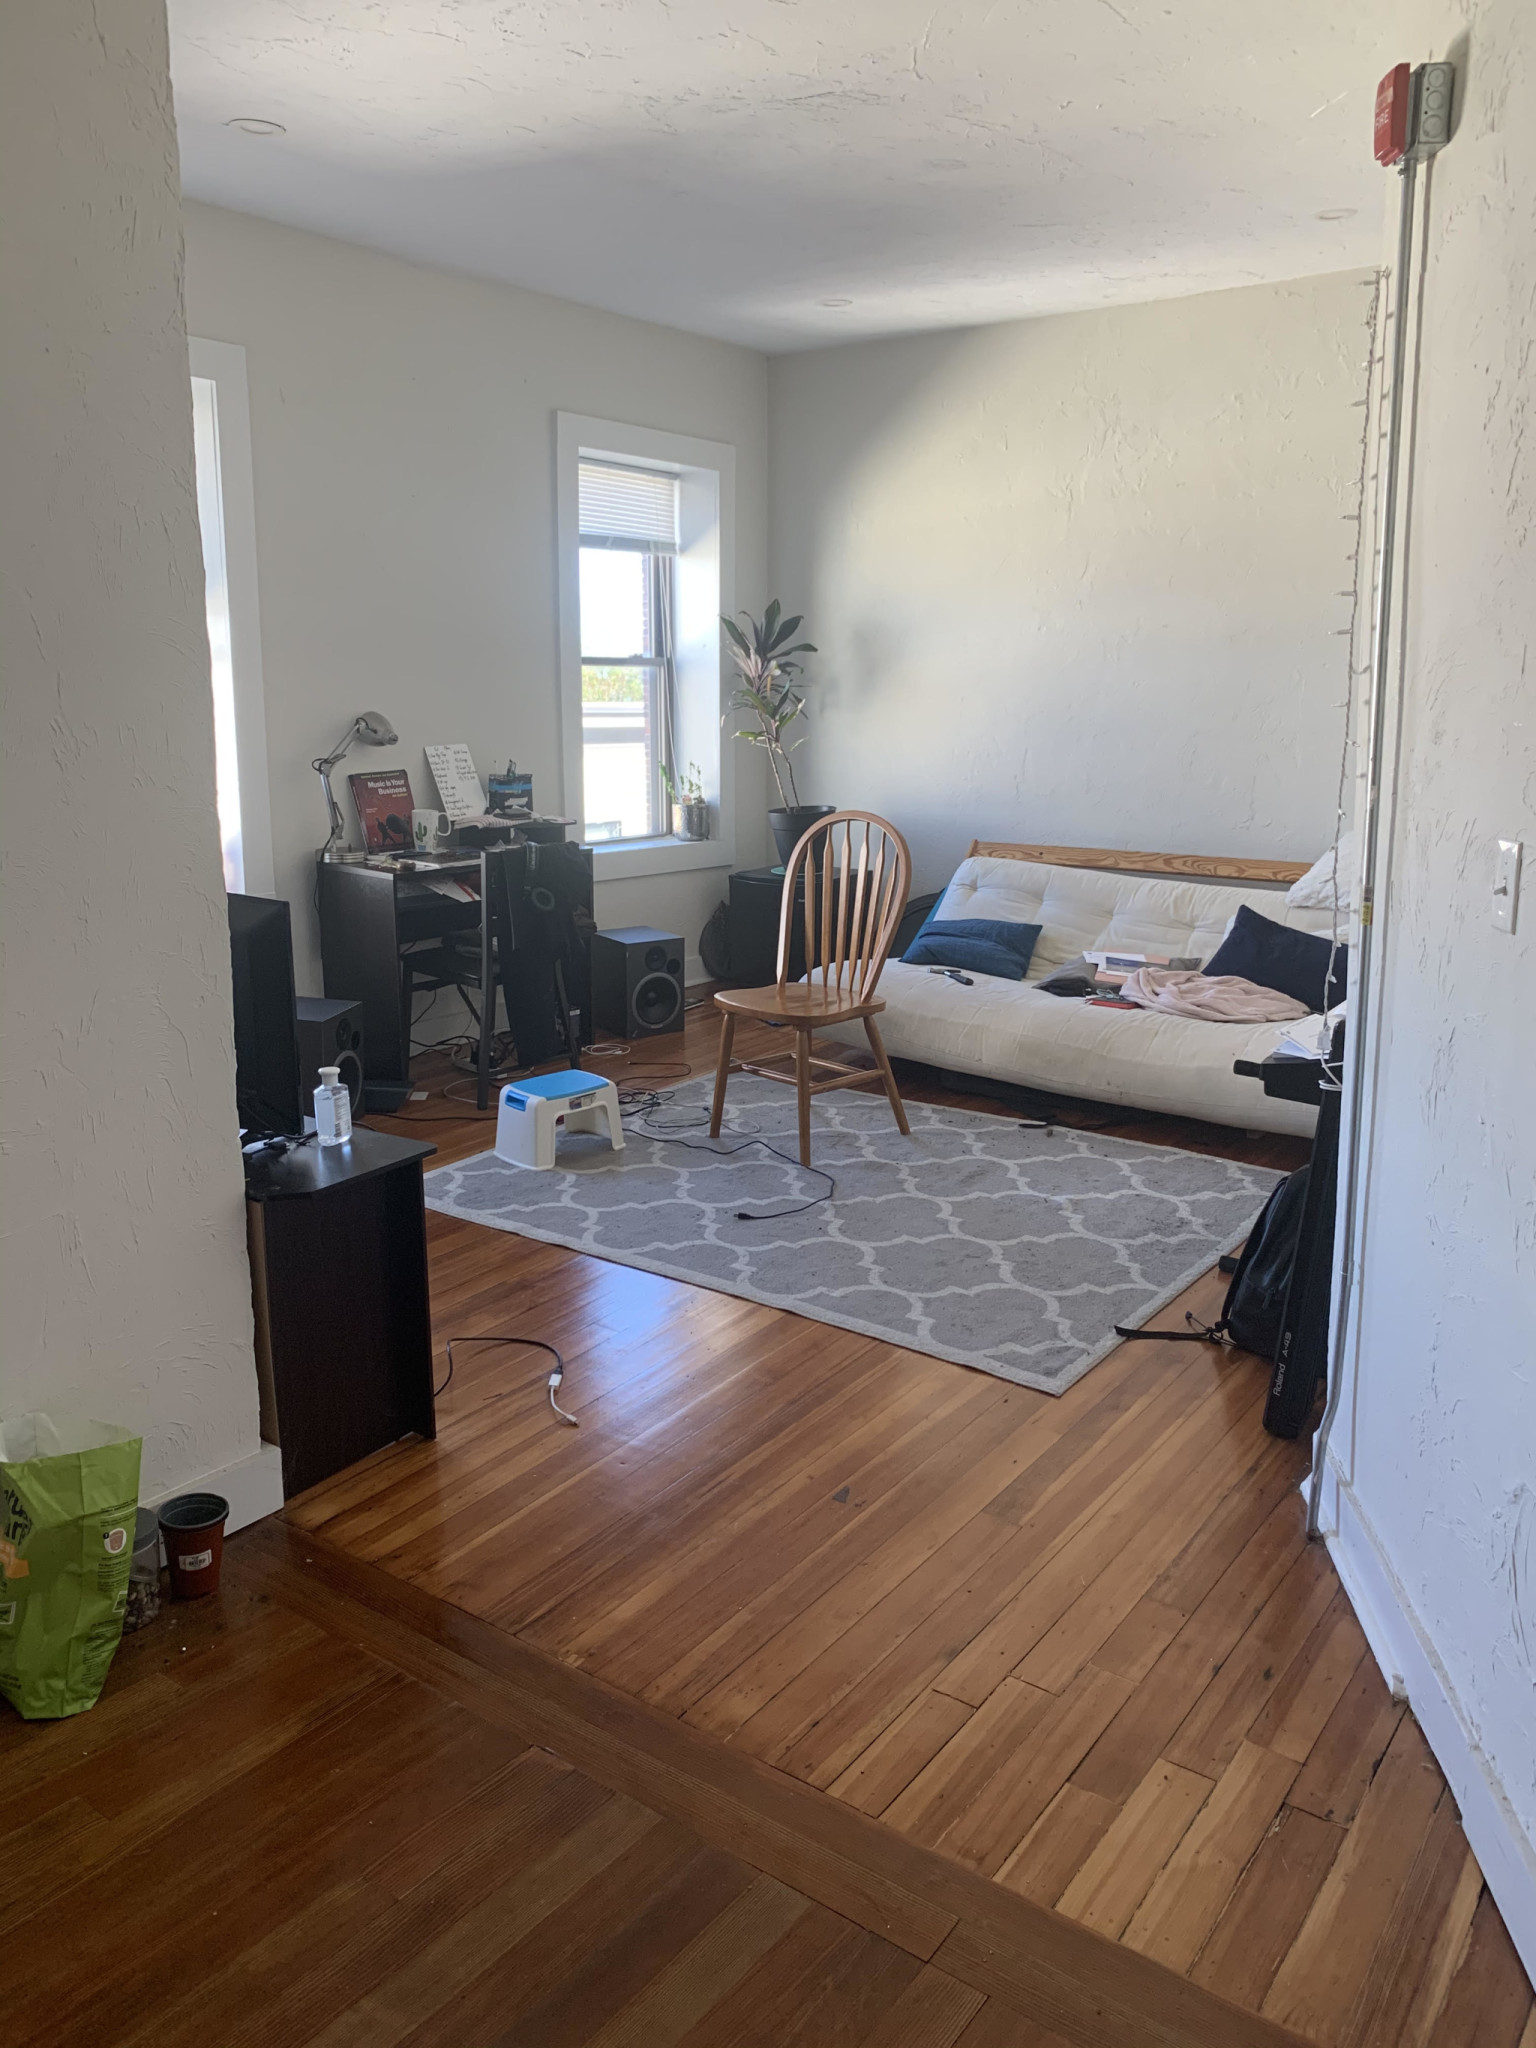 Photos of apartment on Oyster Bay Rd.,Boston MA 02125